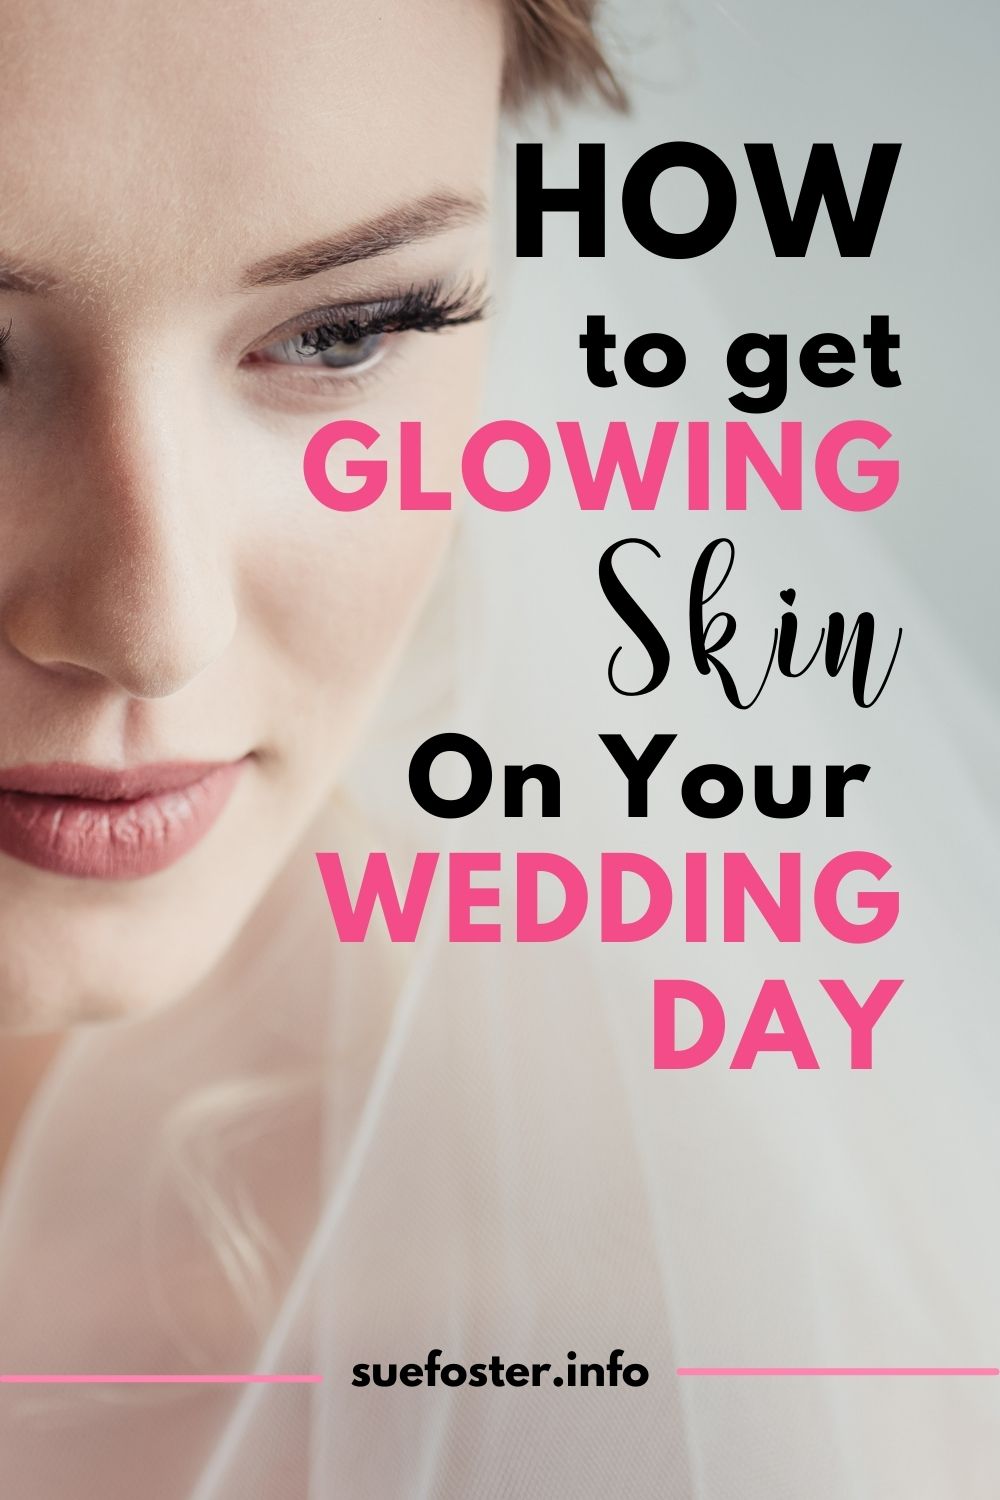 No matter the look you have in mind, get ready to put in some extra effort to be the blushing bride you want to be. Read about a few easy ways to plan and start that unique skincare regimen now.